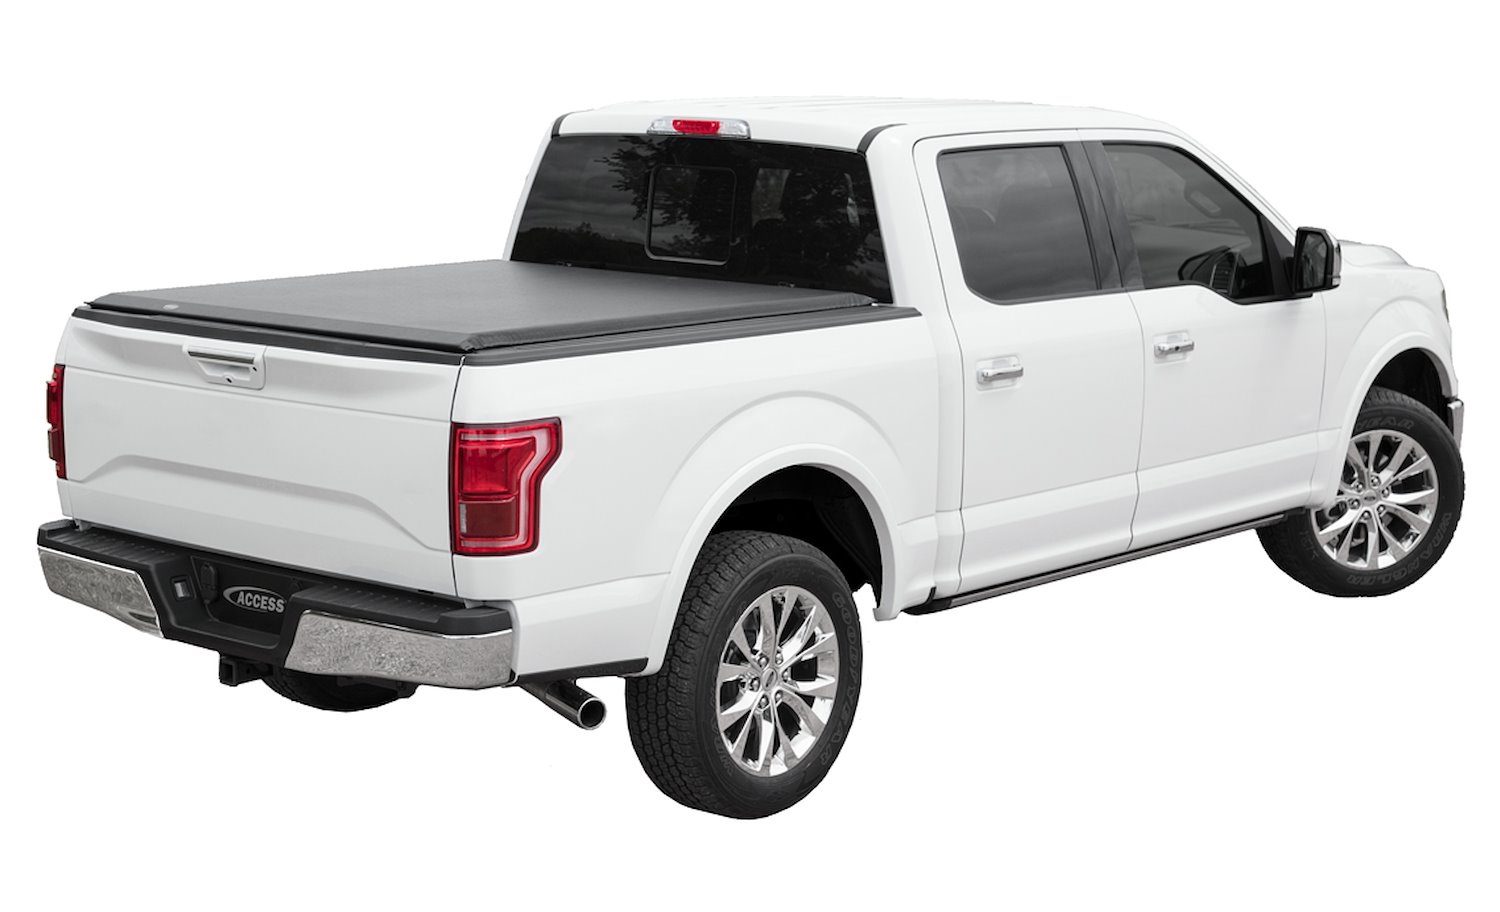 Original Roll-Up Tonneau Cover, 2008-2016 Ford F-250/F-350, with 6 ft. 8 in. Bed